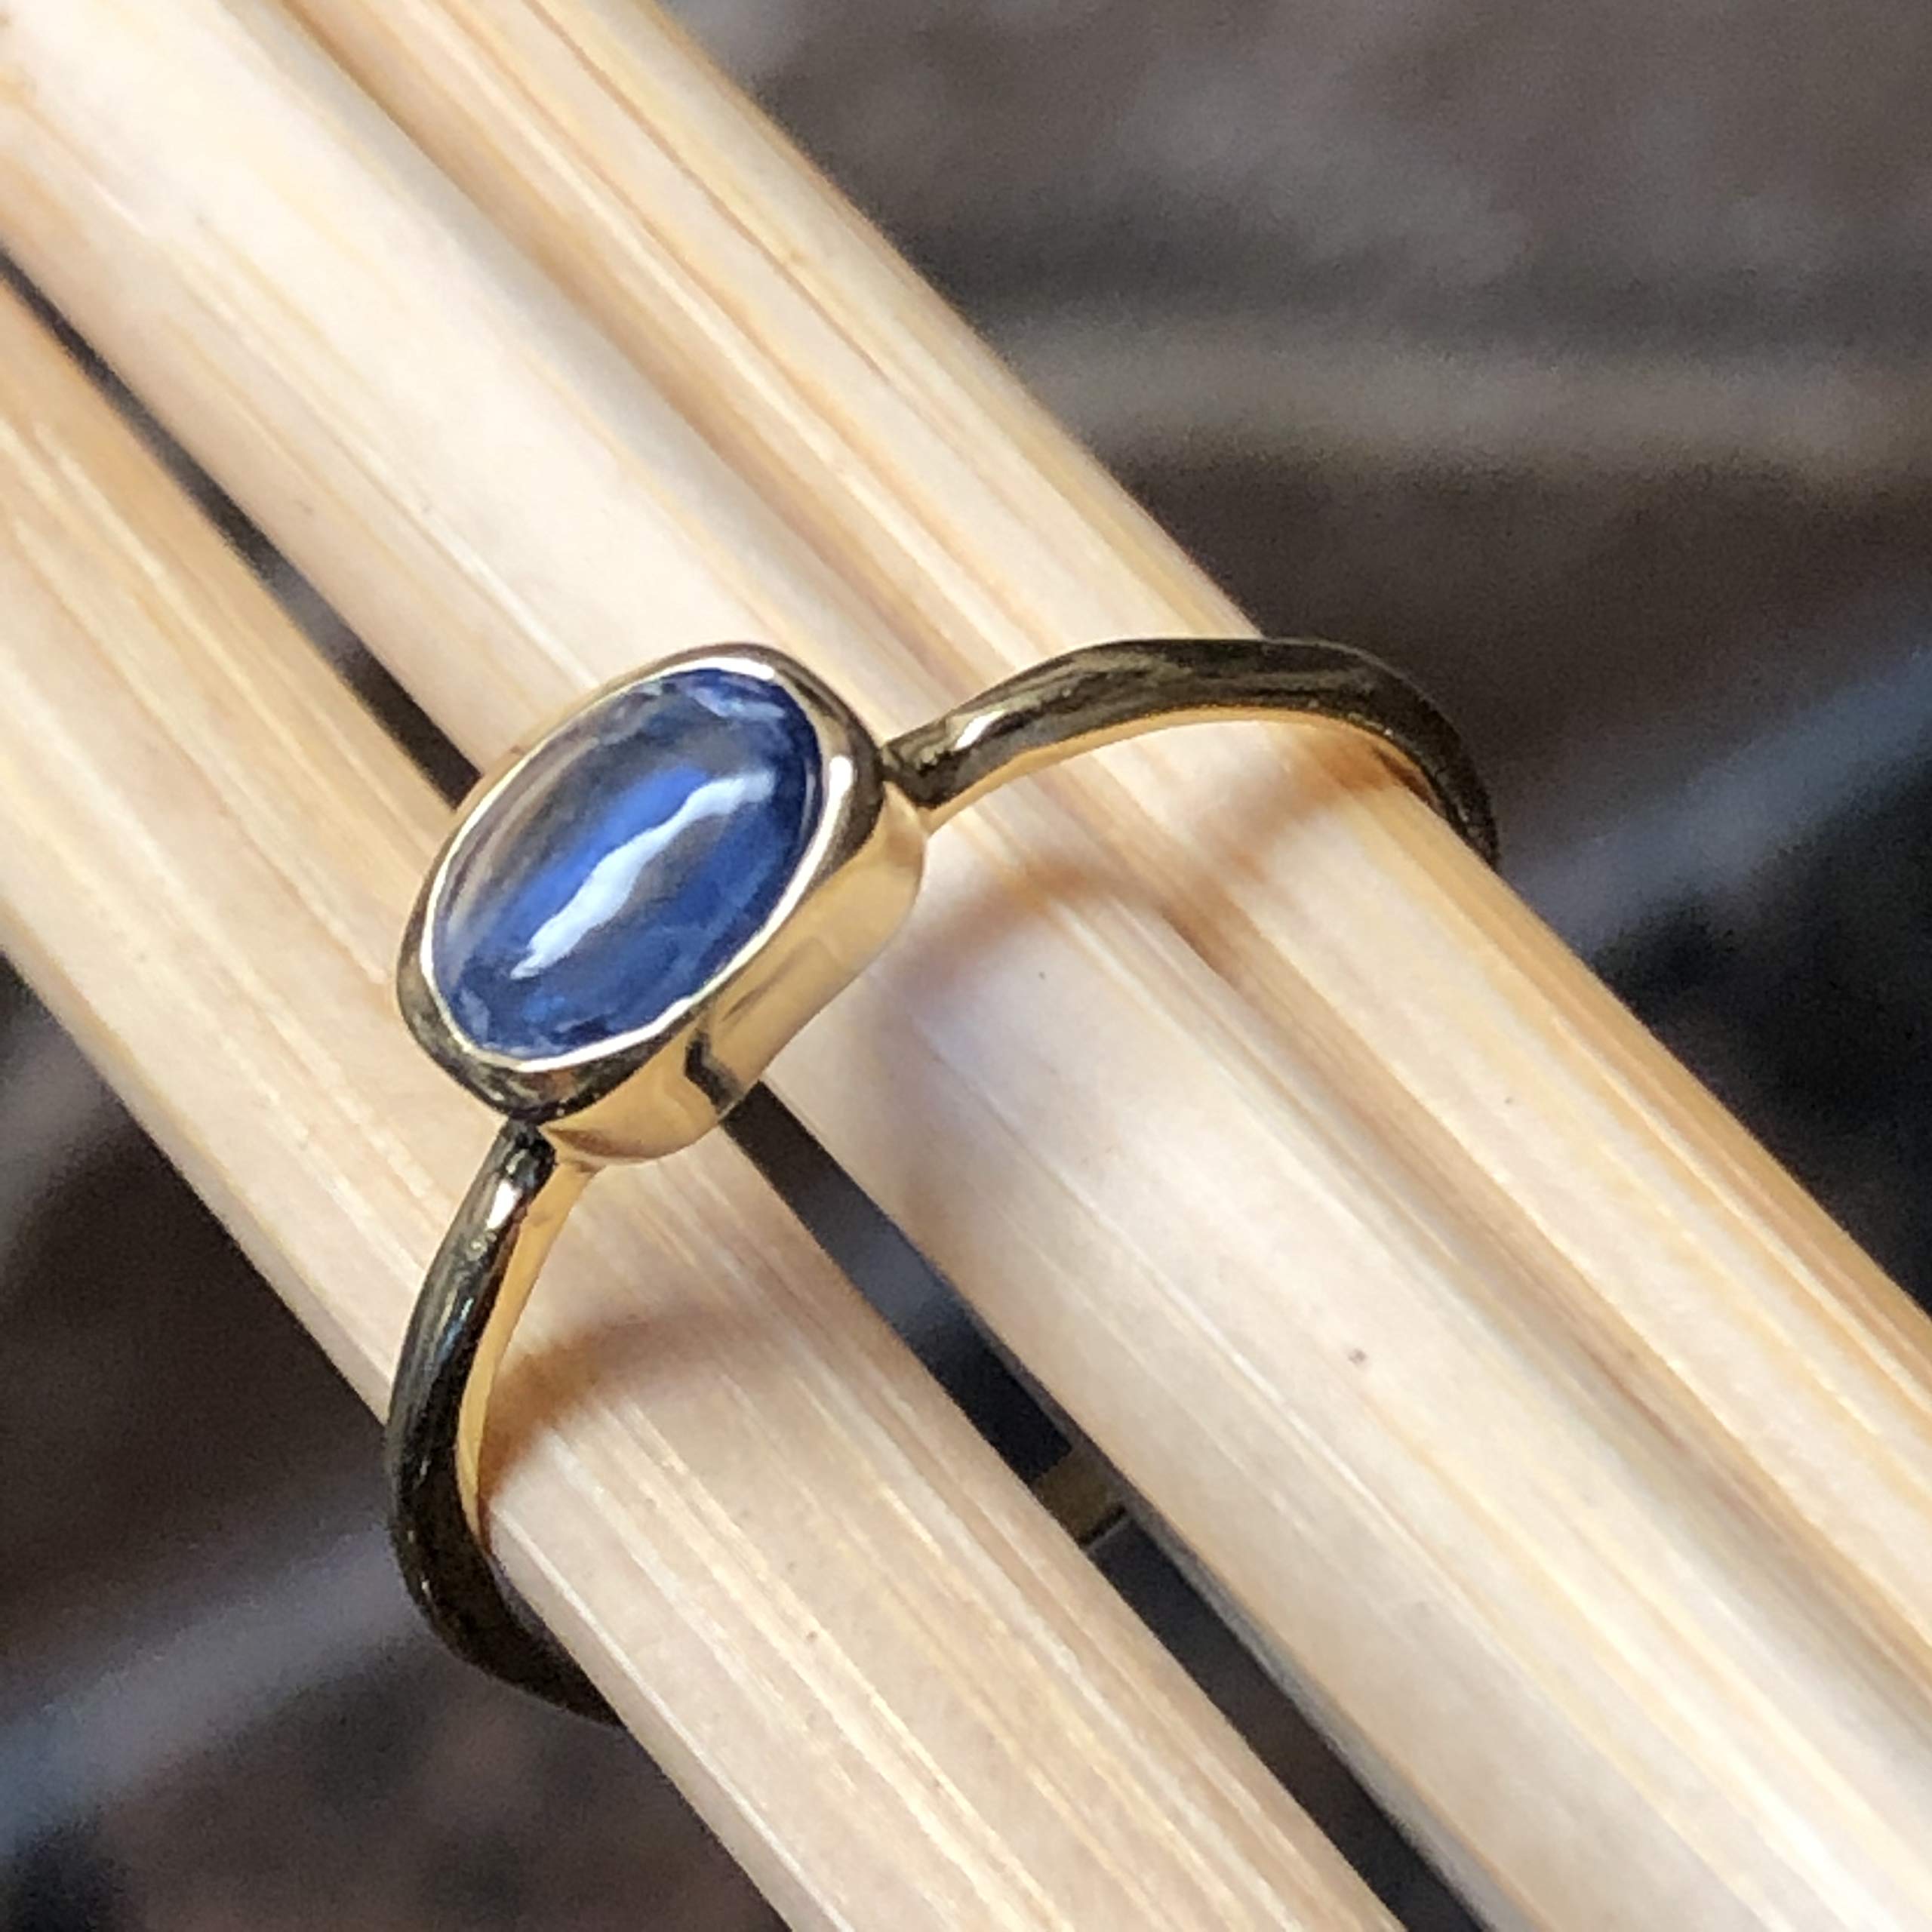 Genuine Blue Tanzanite 14k Gold Over Solid Sterling Silver Engagement Ring Size 6, 7, 8, 9, 10 - Natural Rocks by Kala